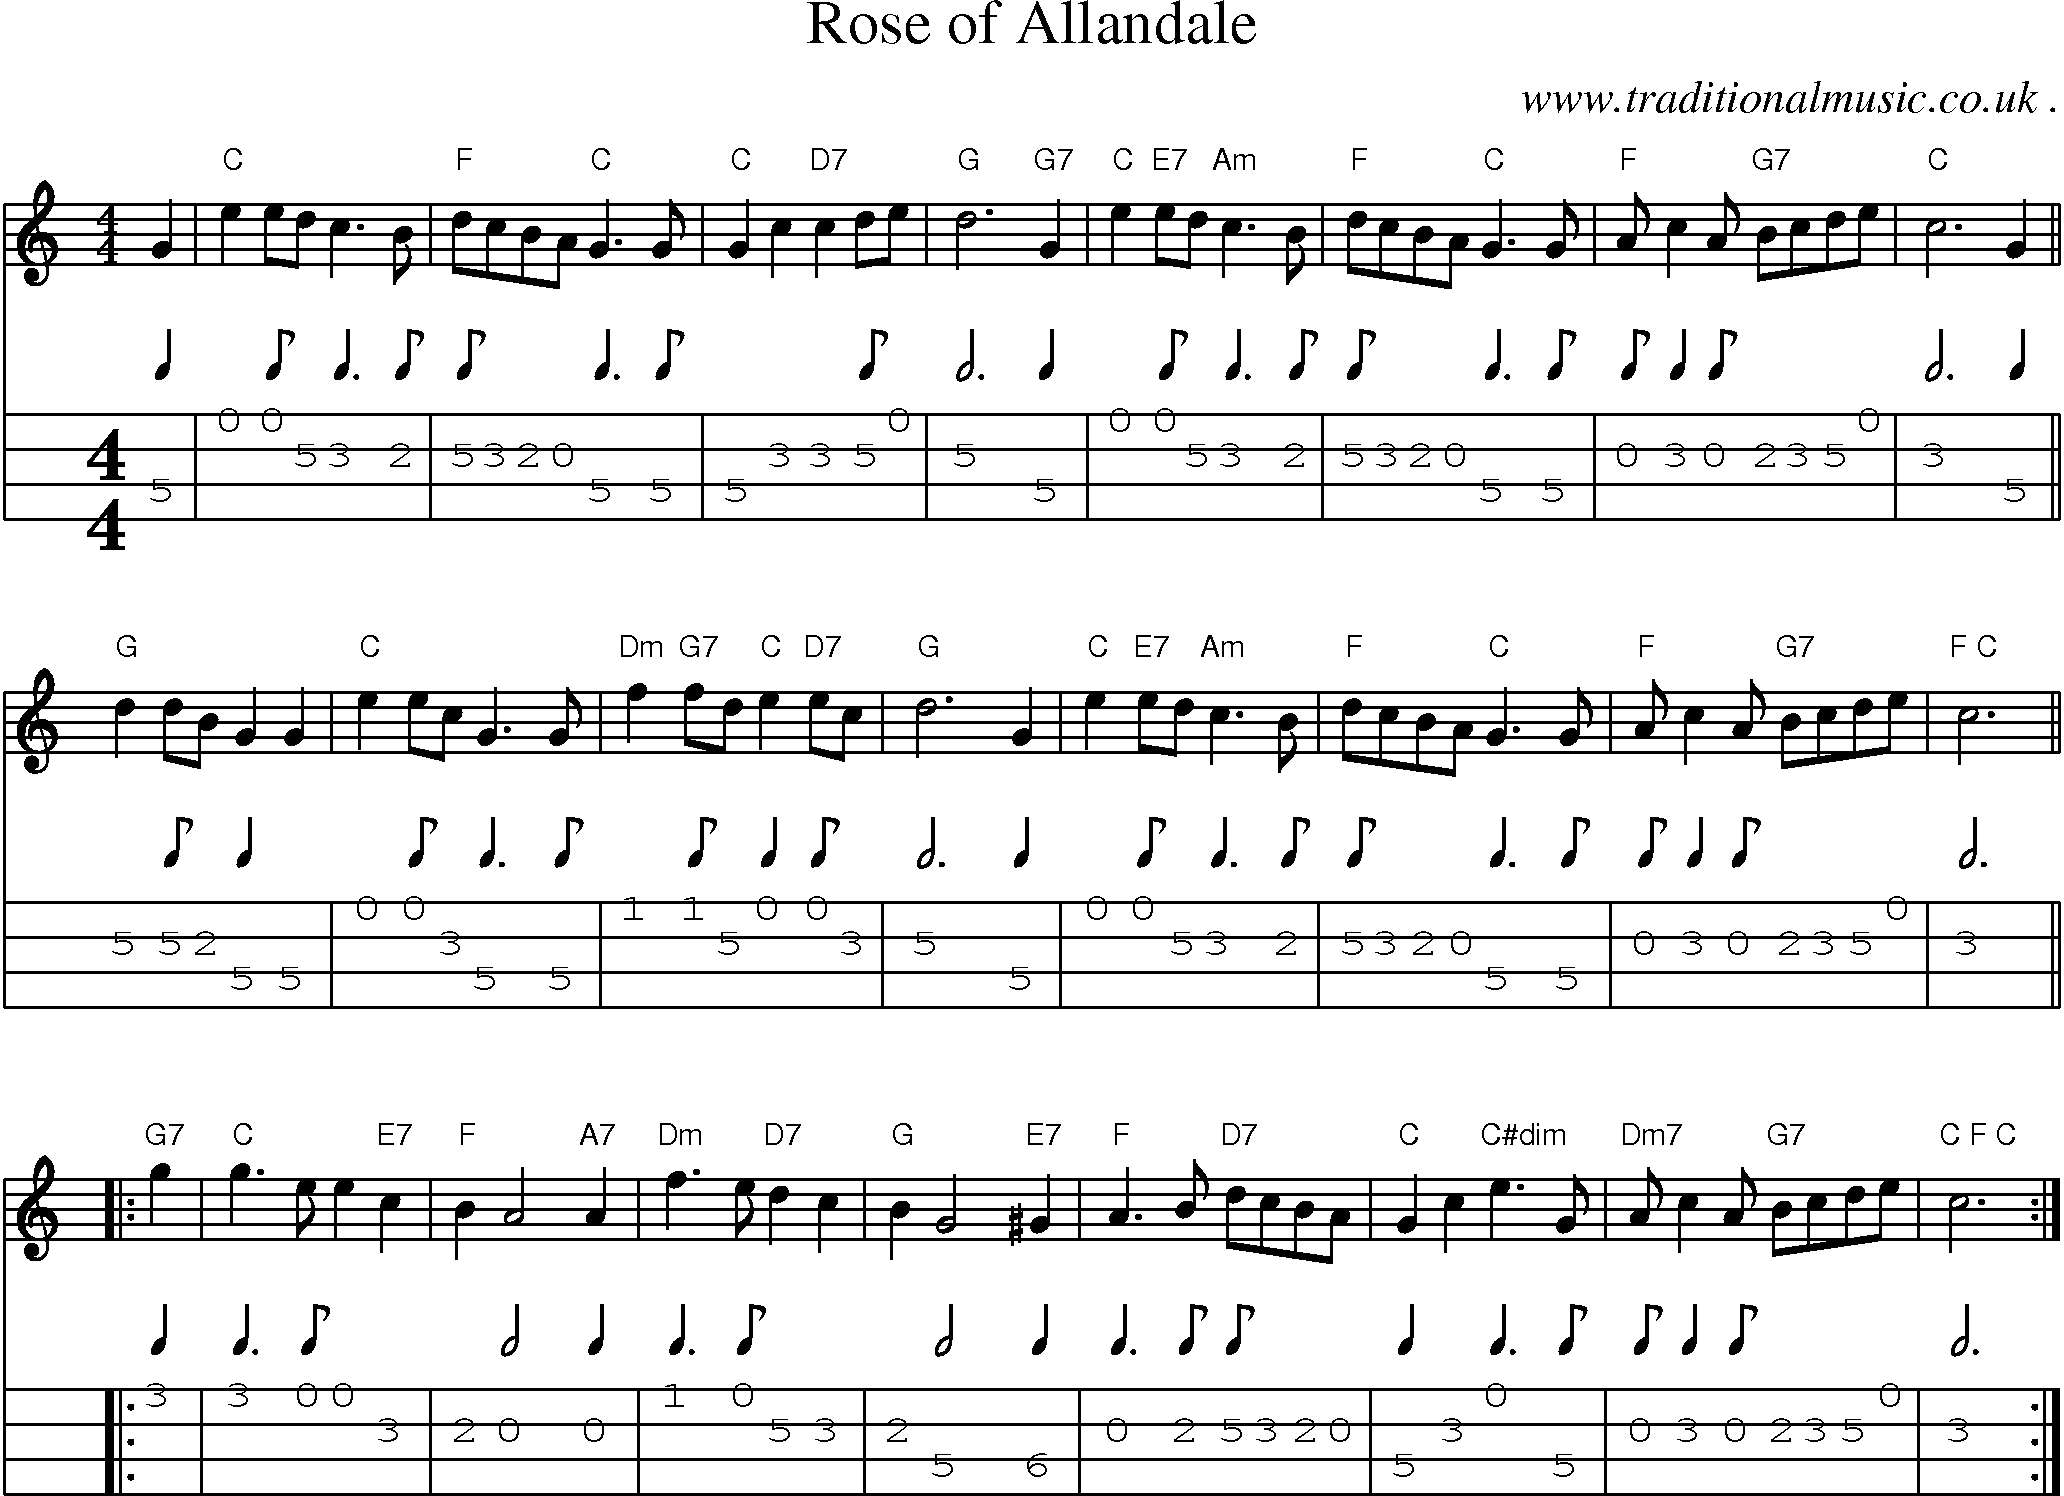 Sheet-music  score, Chords and Mandolin Tabs for Rose Of Allandale